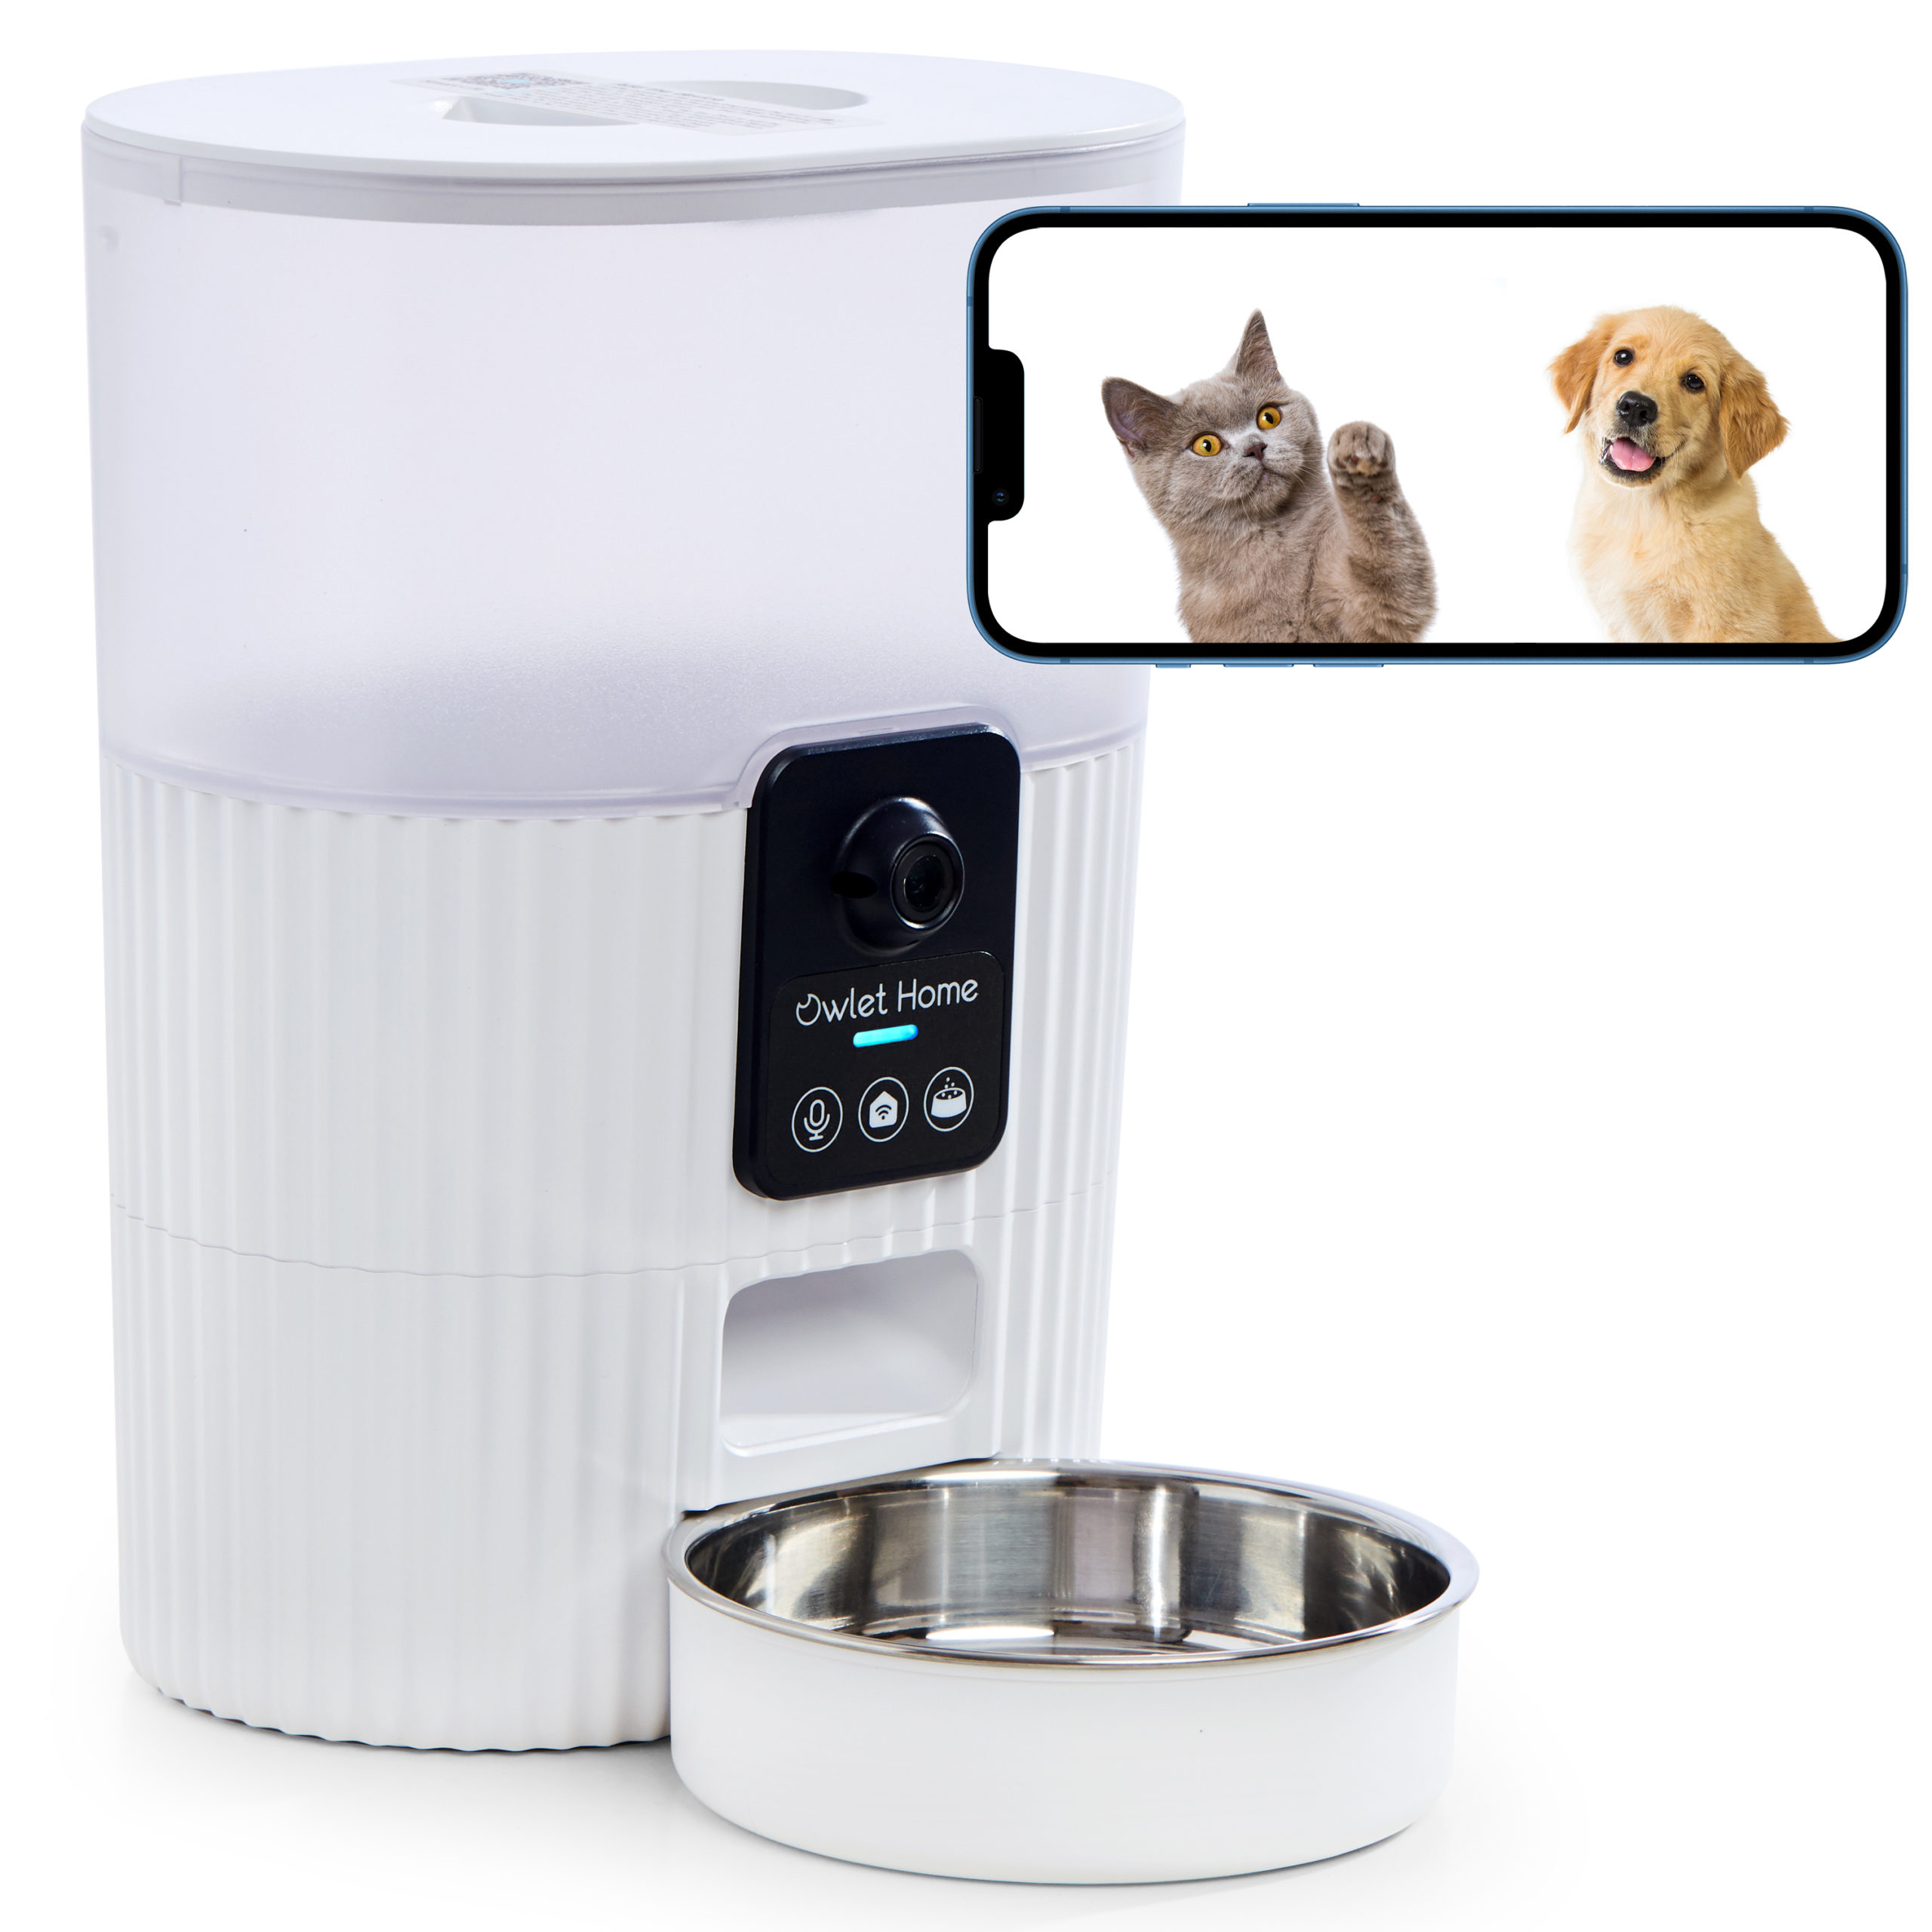 Owlet Home Smart Automatic Pet Feeder with 1080P HD Camera for Cats & Dogs  (3.5L), WiFi(2.4GHz&5GHz), Live Video, Auto Night Vision, 2-Way Audio